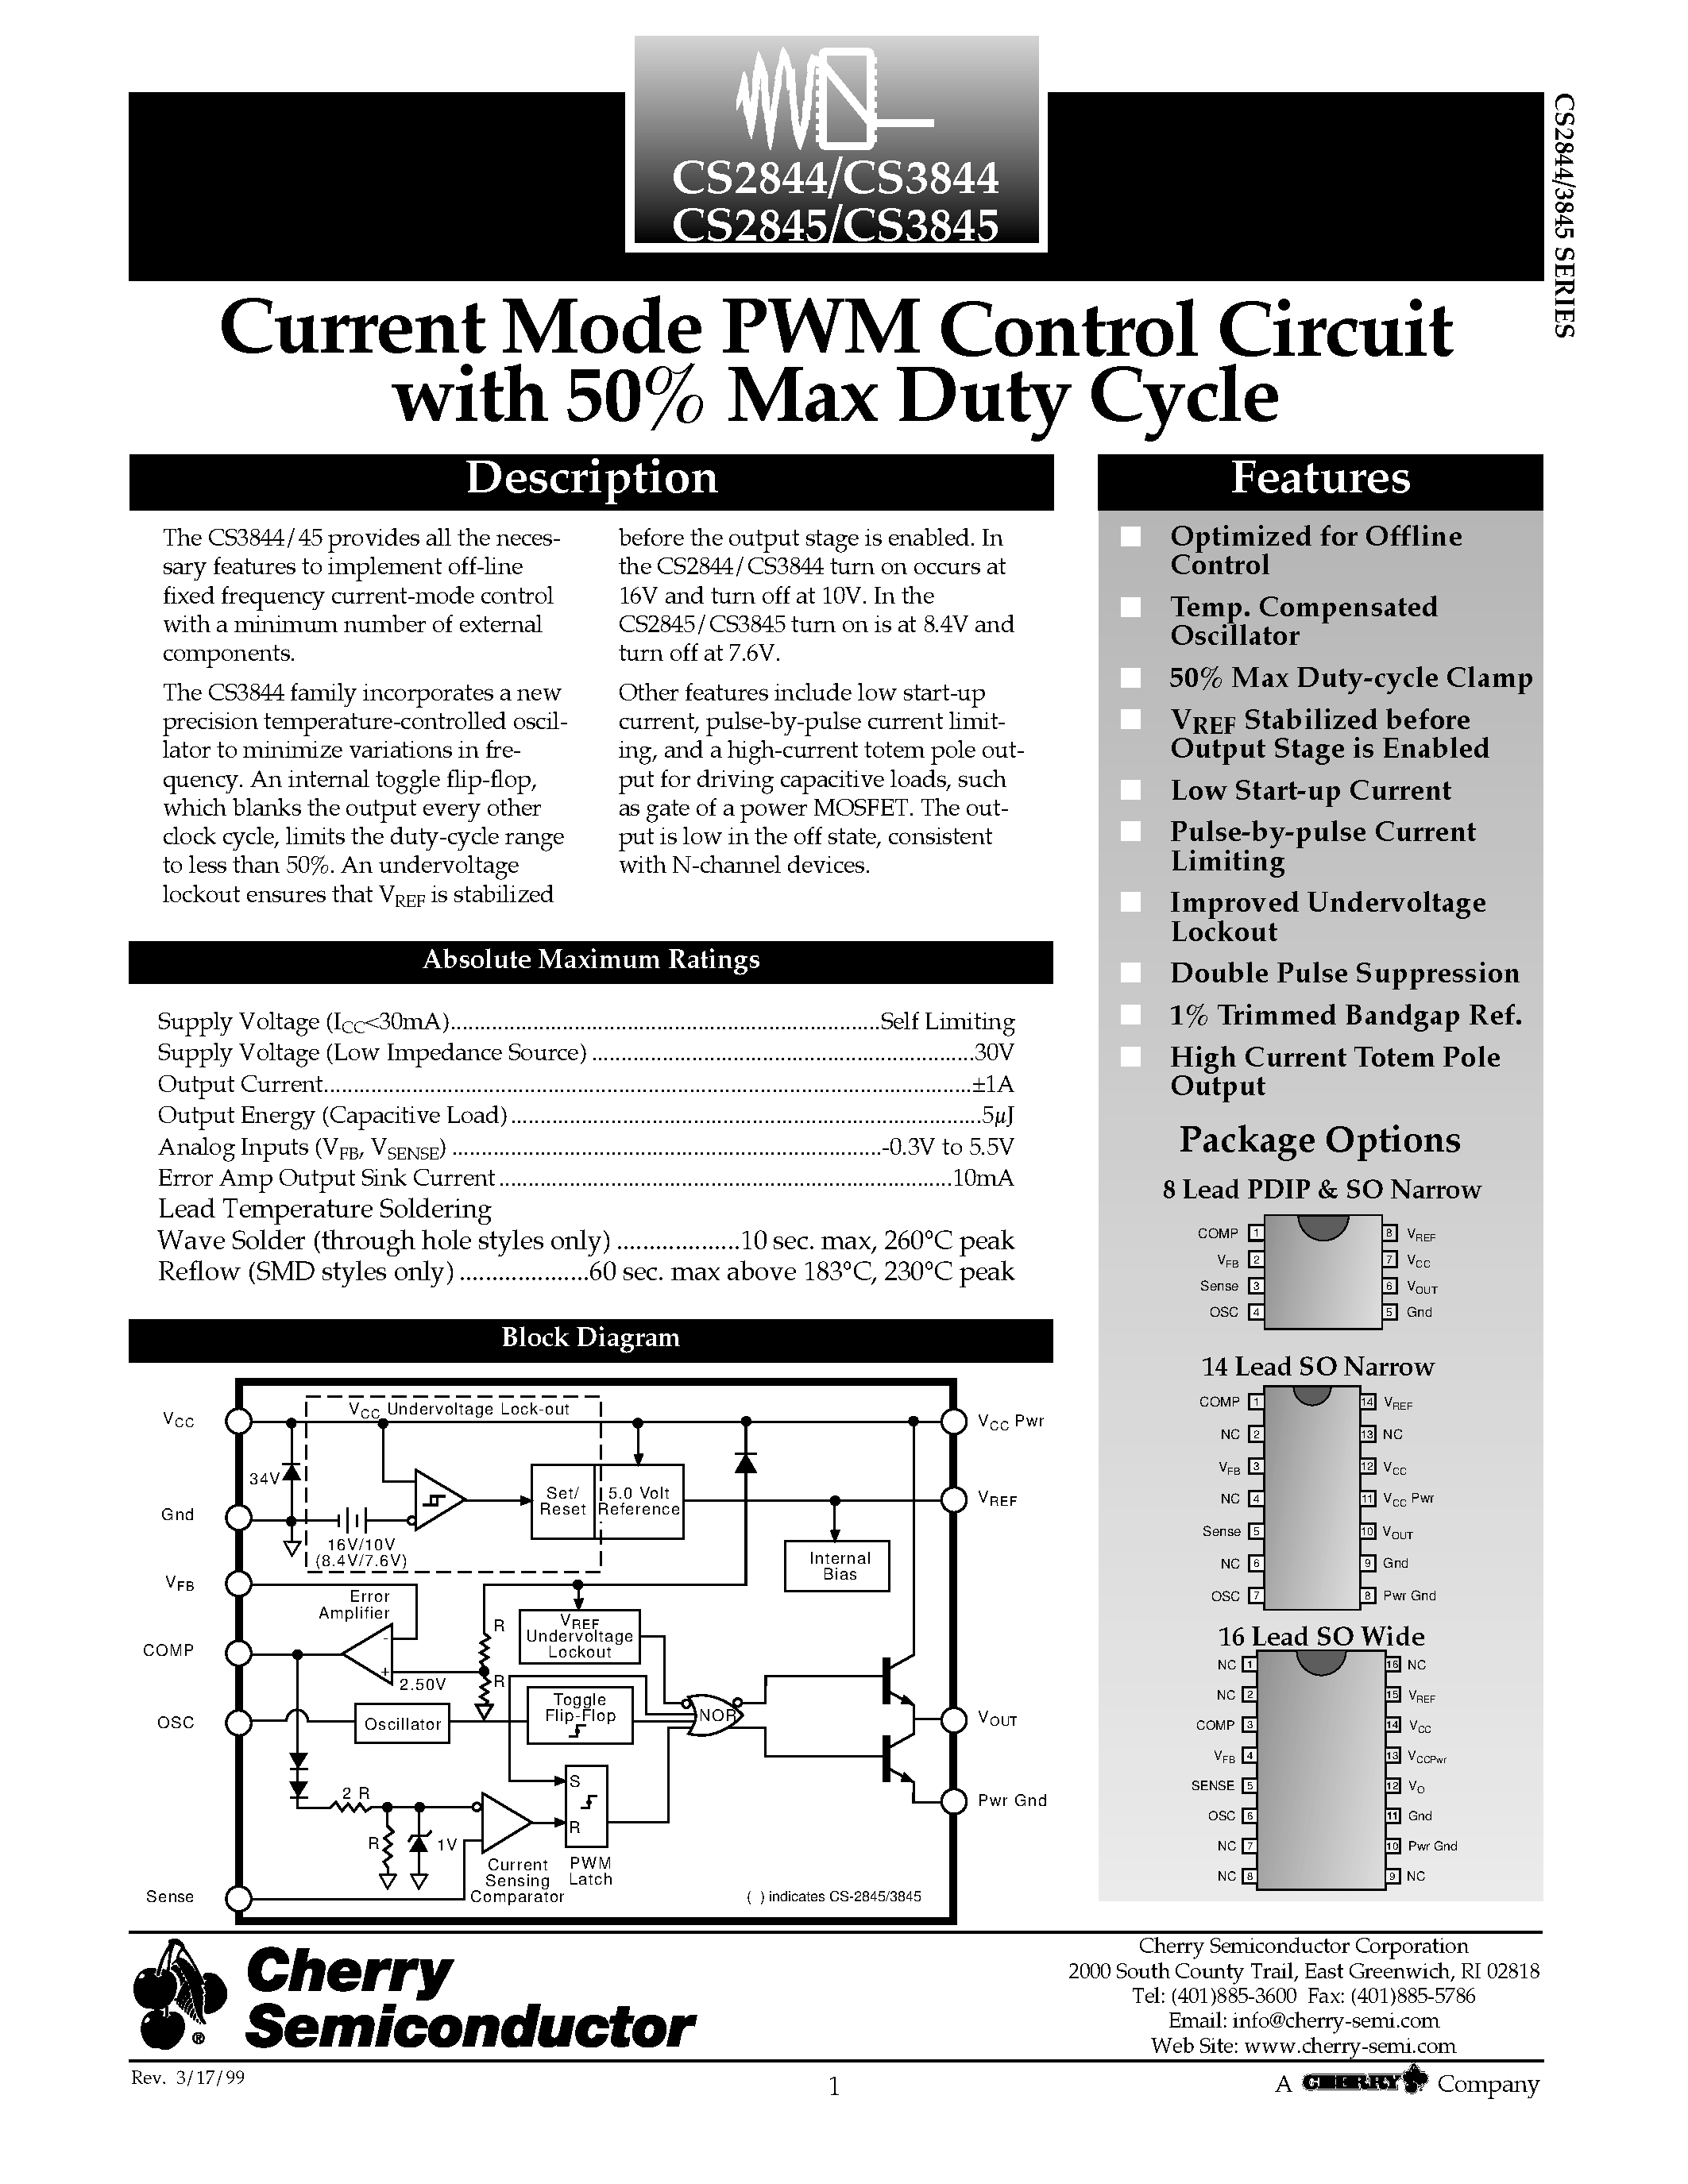 Datasheet CS2844LD14 - Current Mode PWM Control Circuit with 50% Max Duty Cycle page 1